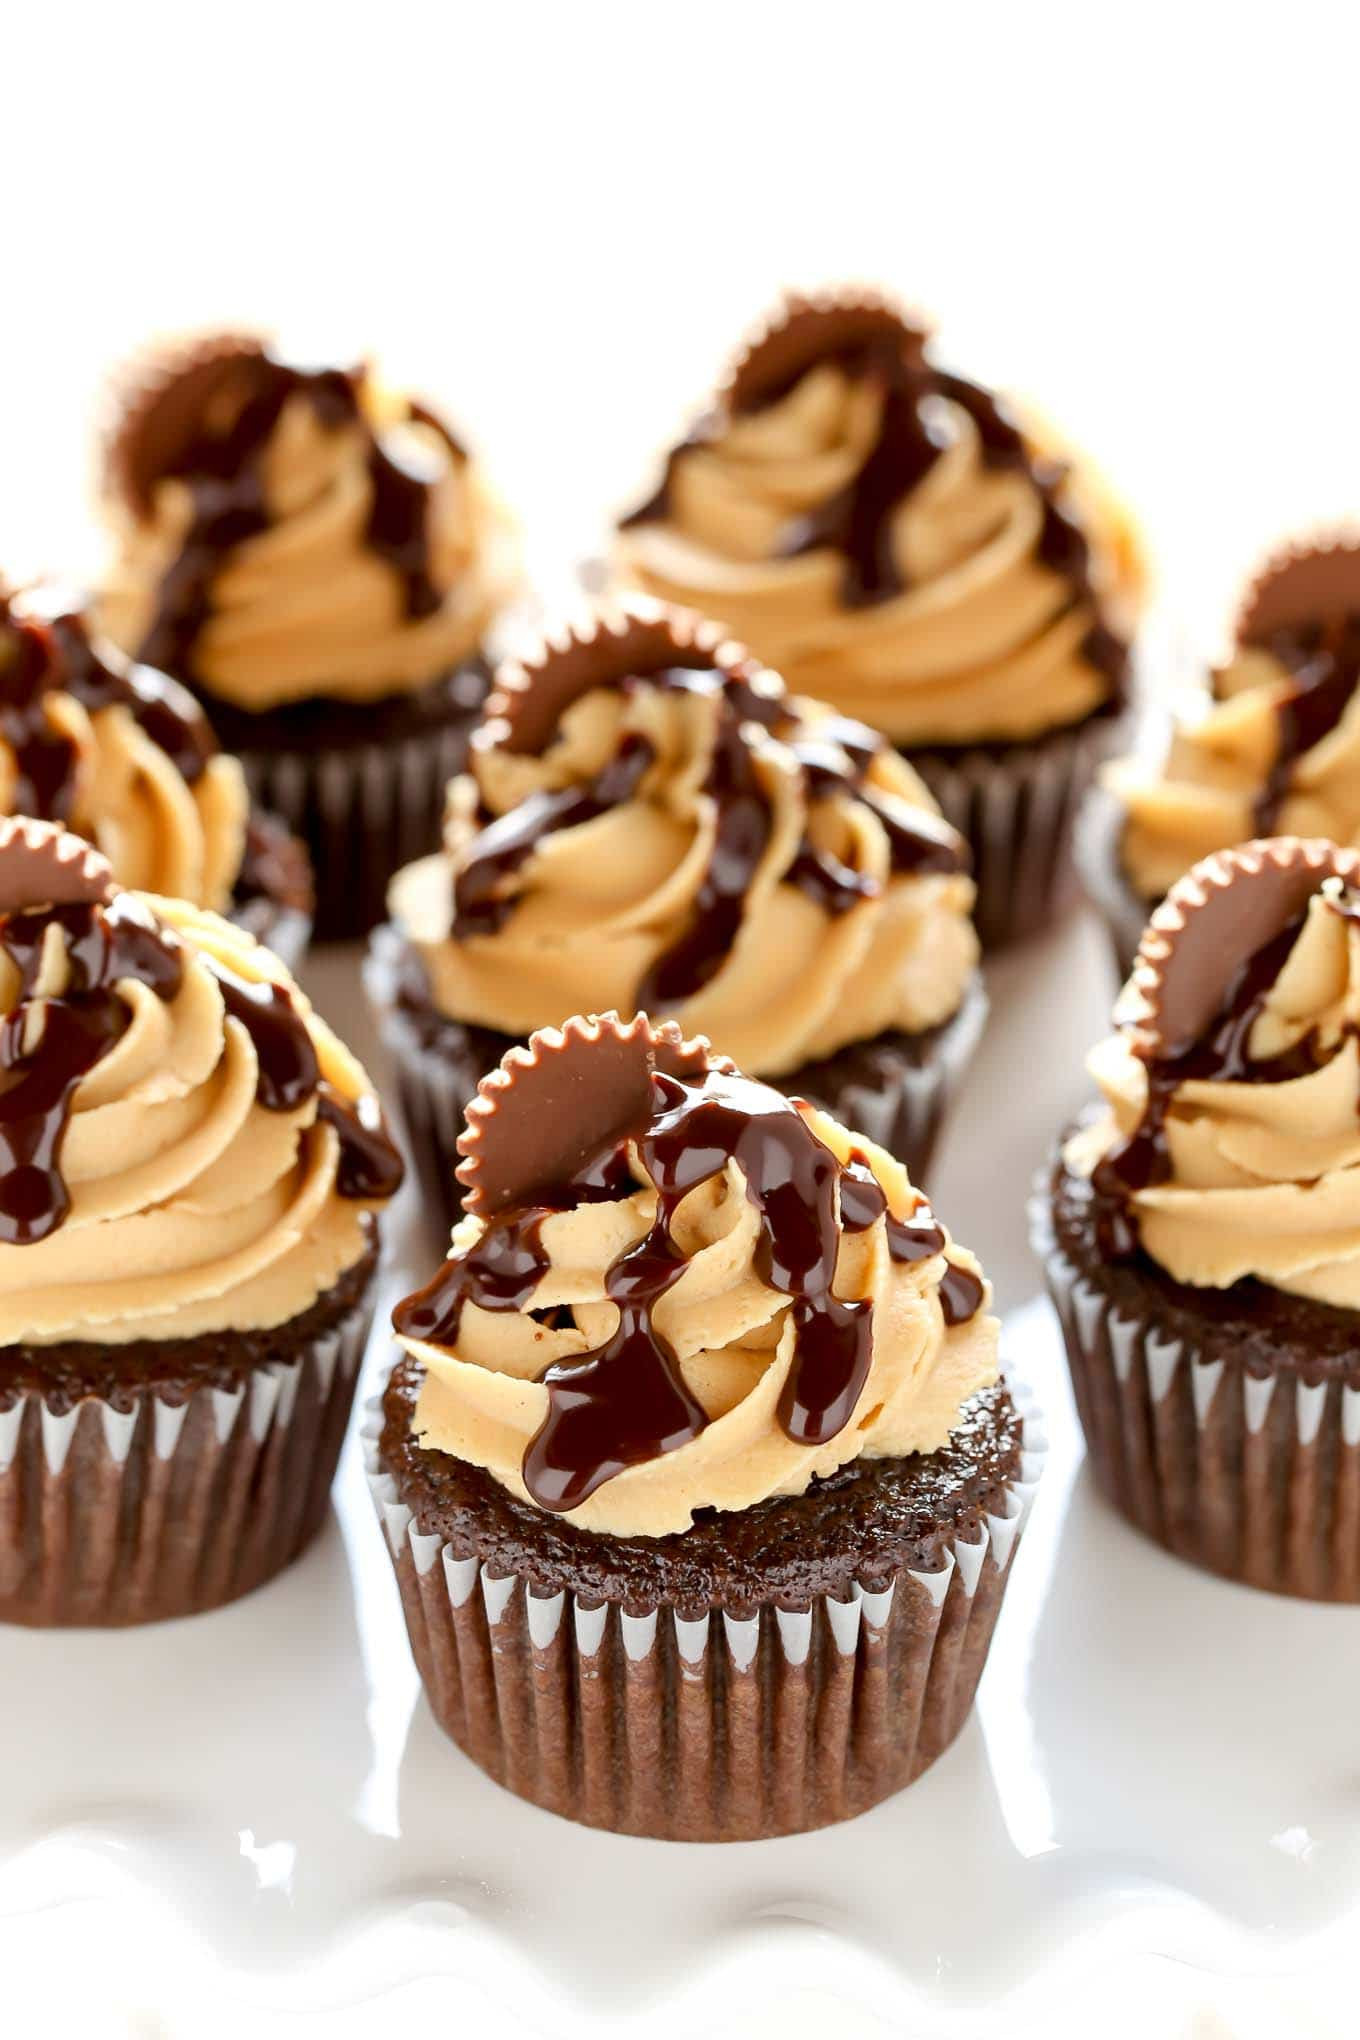 Chocolate Cupcakes With Peanut Butter Frosting
 Chocolate Cupcakes with Peanut Butter Frosting